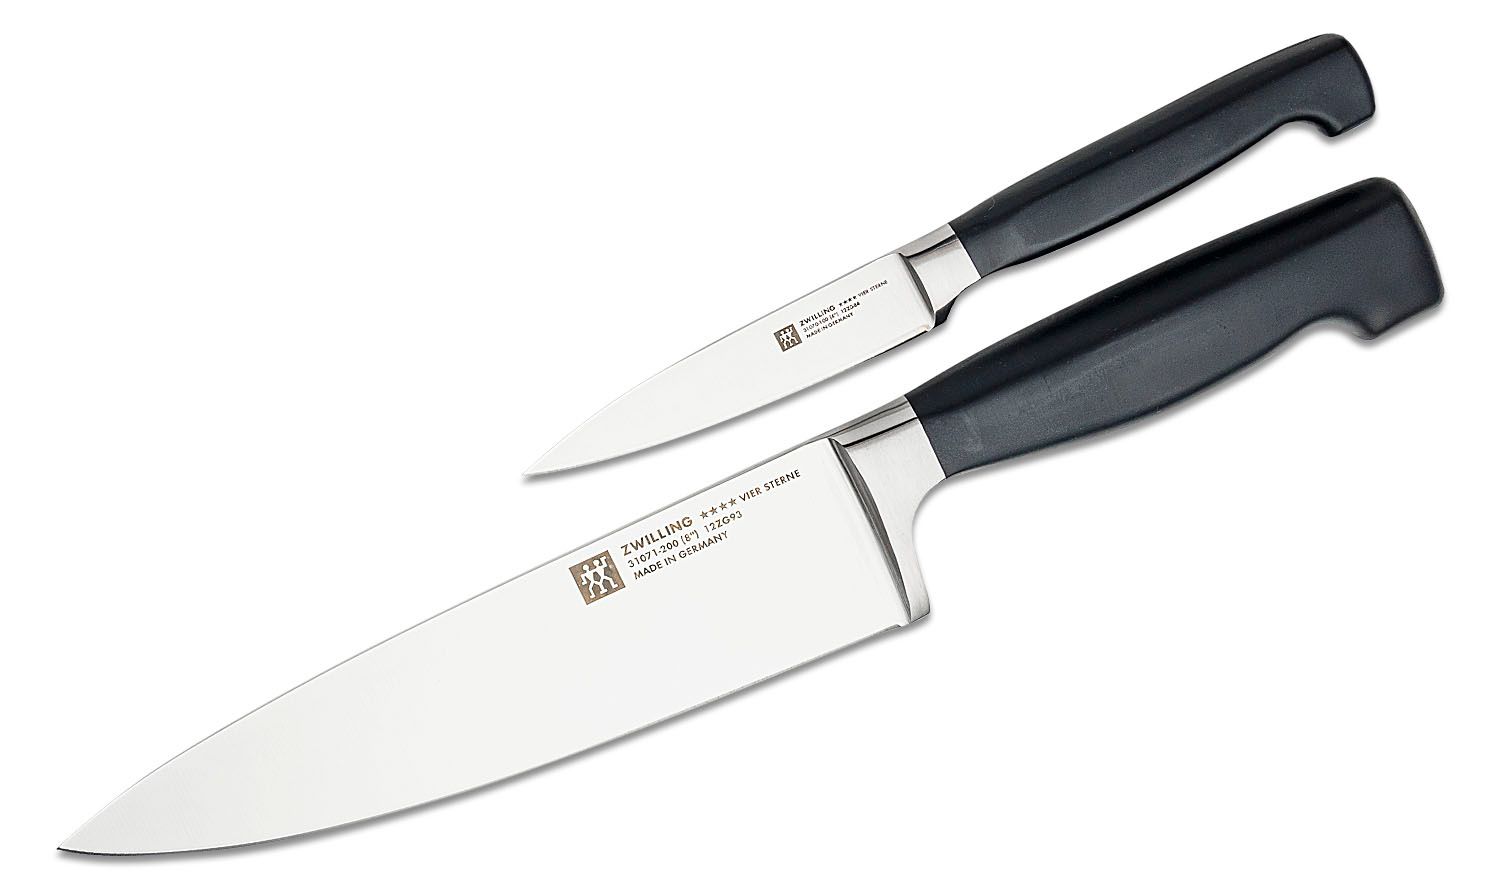 Zwilling J.A. Henckels Four Star 4 inch Paring Knife, 31070-100 - *New